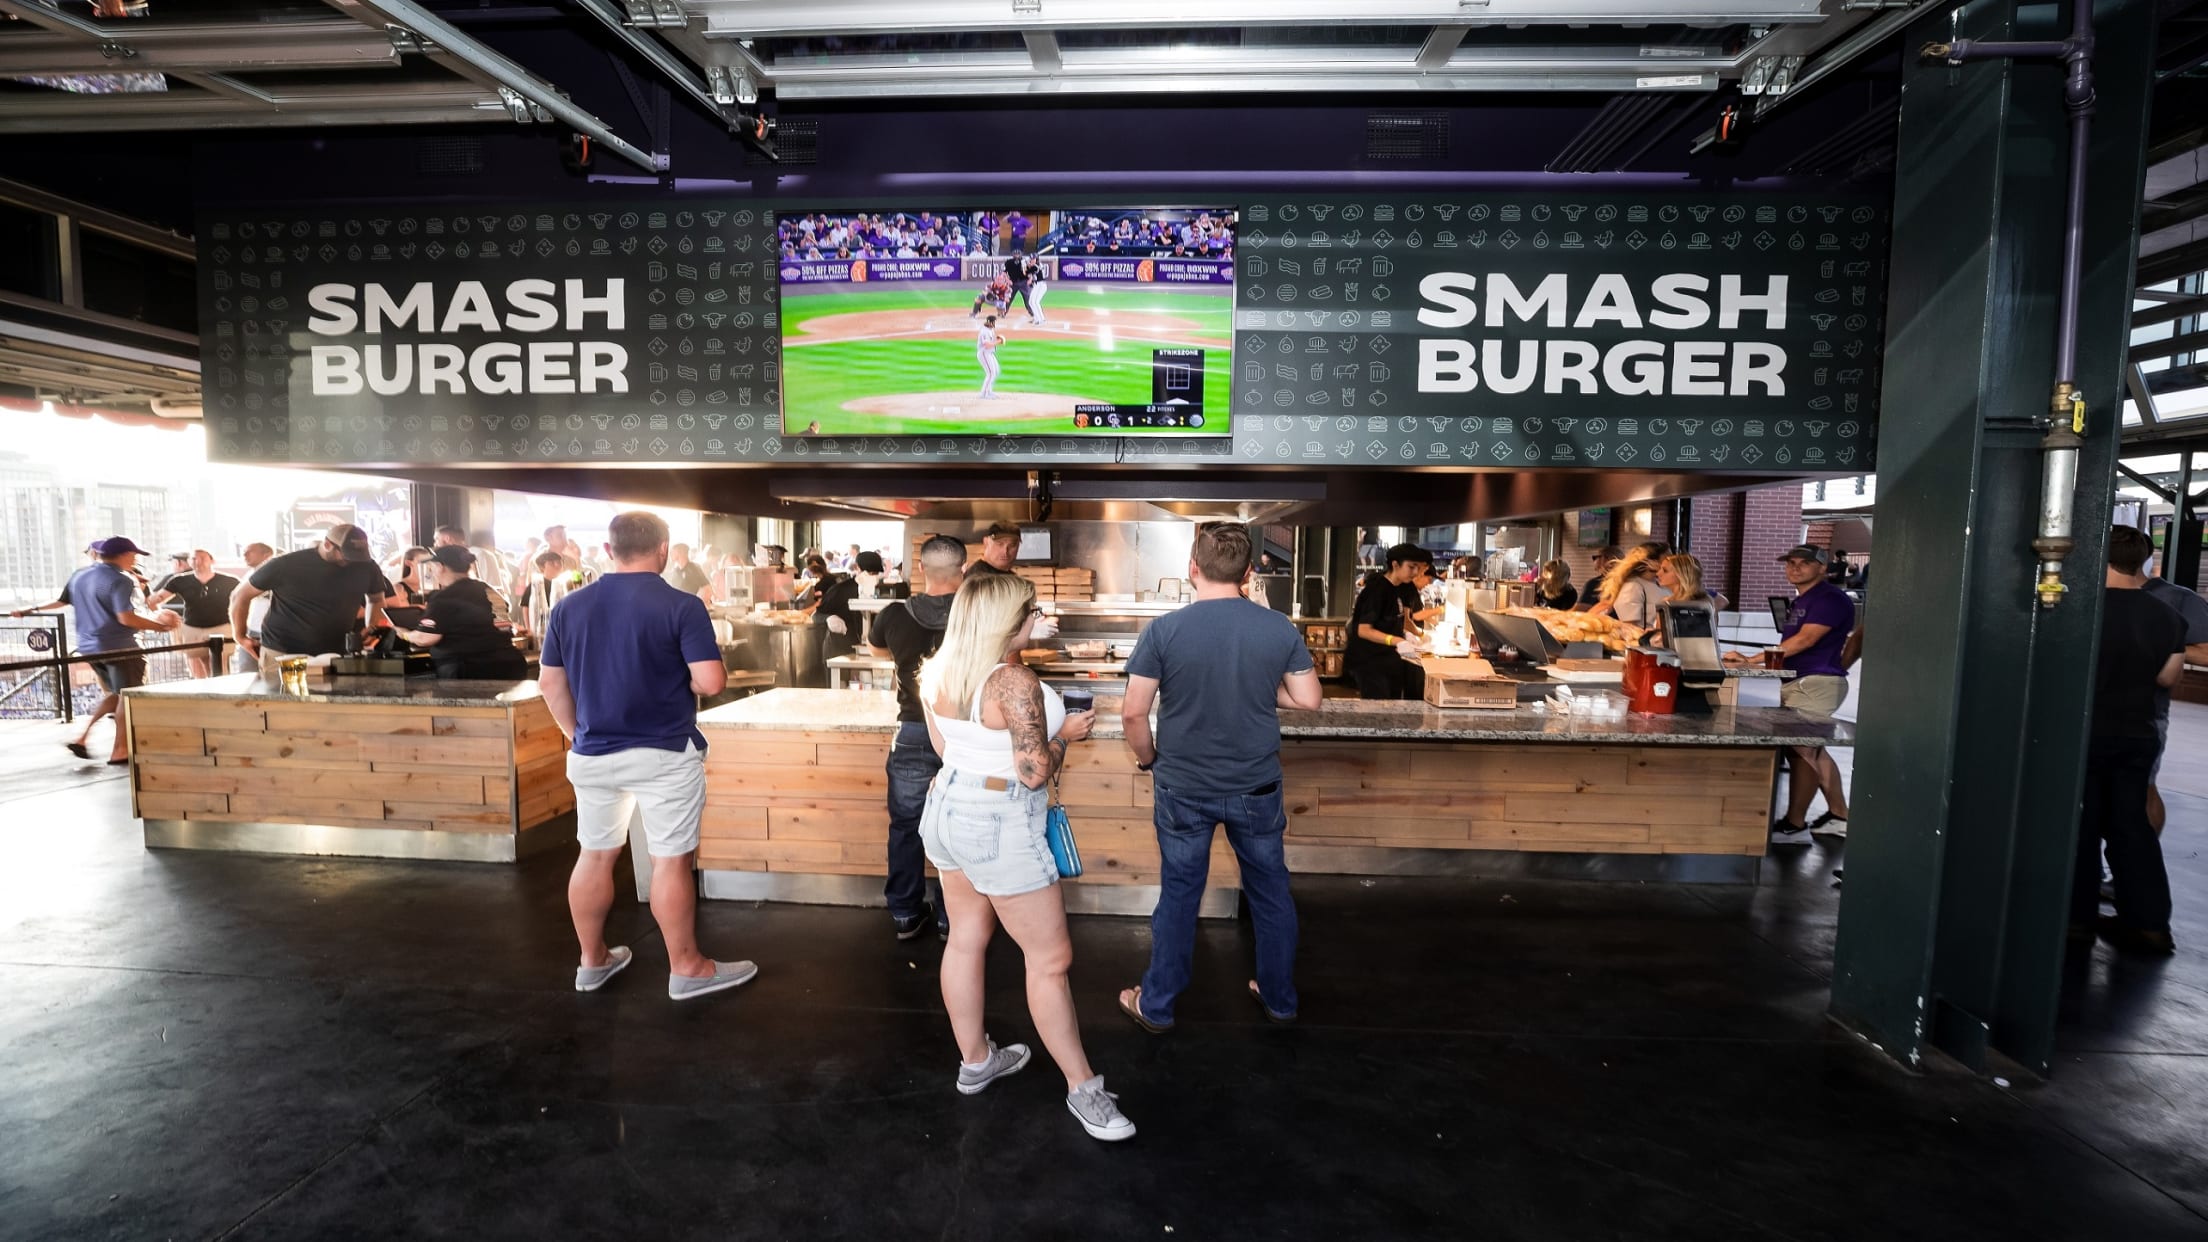 11 Things to Eat (and Drink) at Coors Field